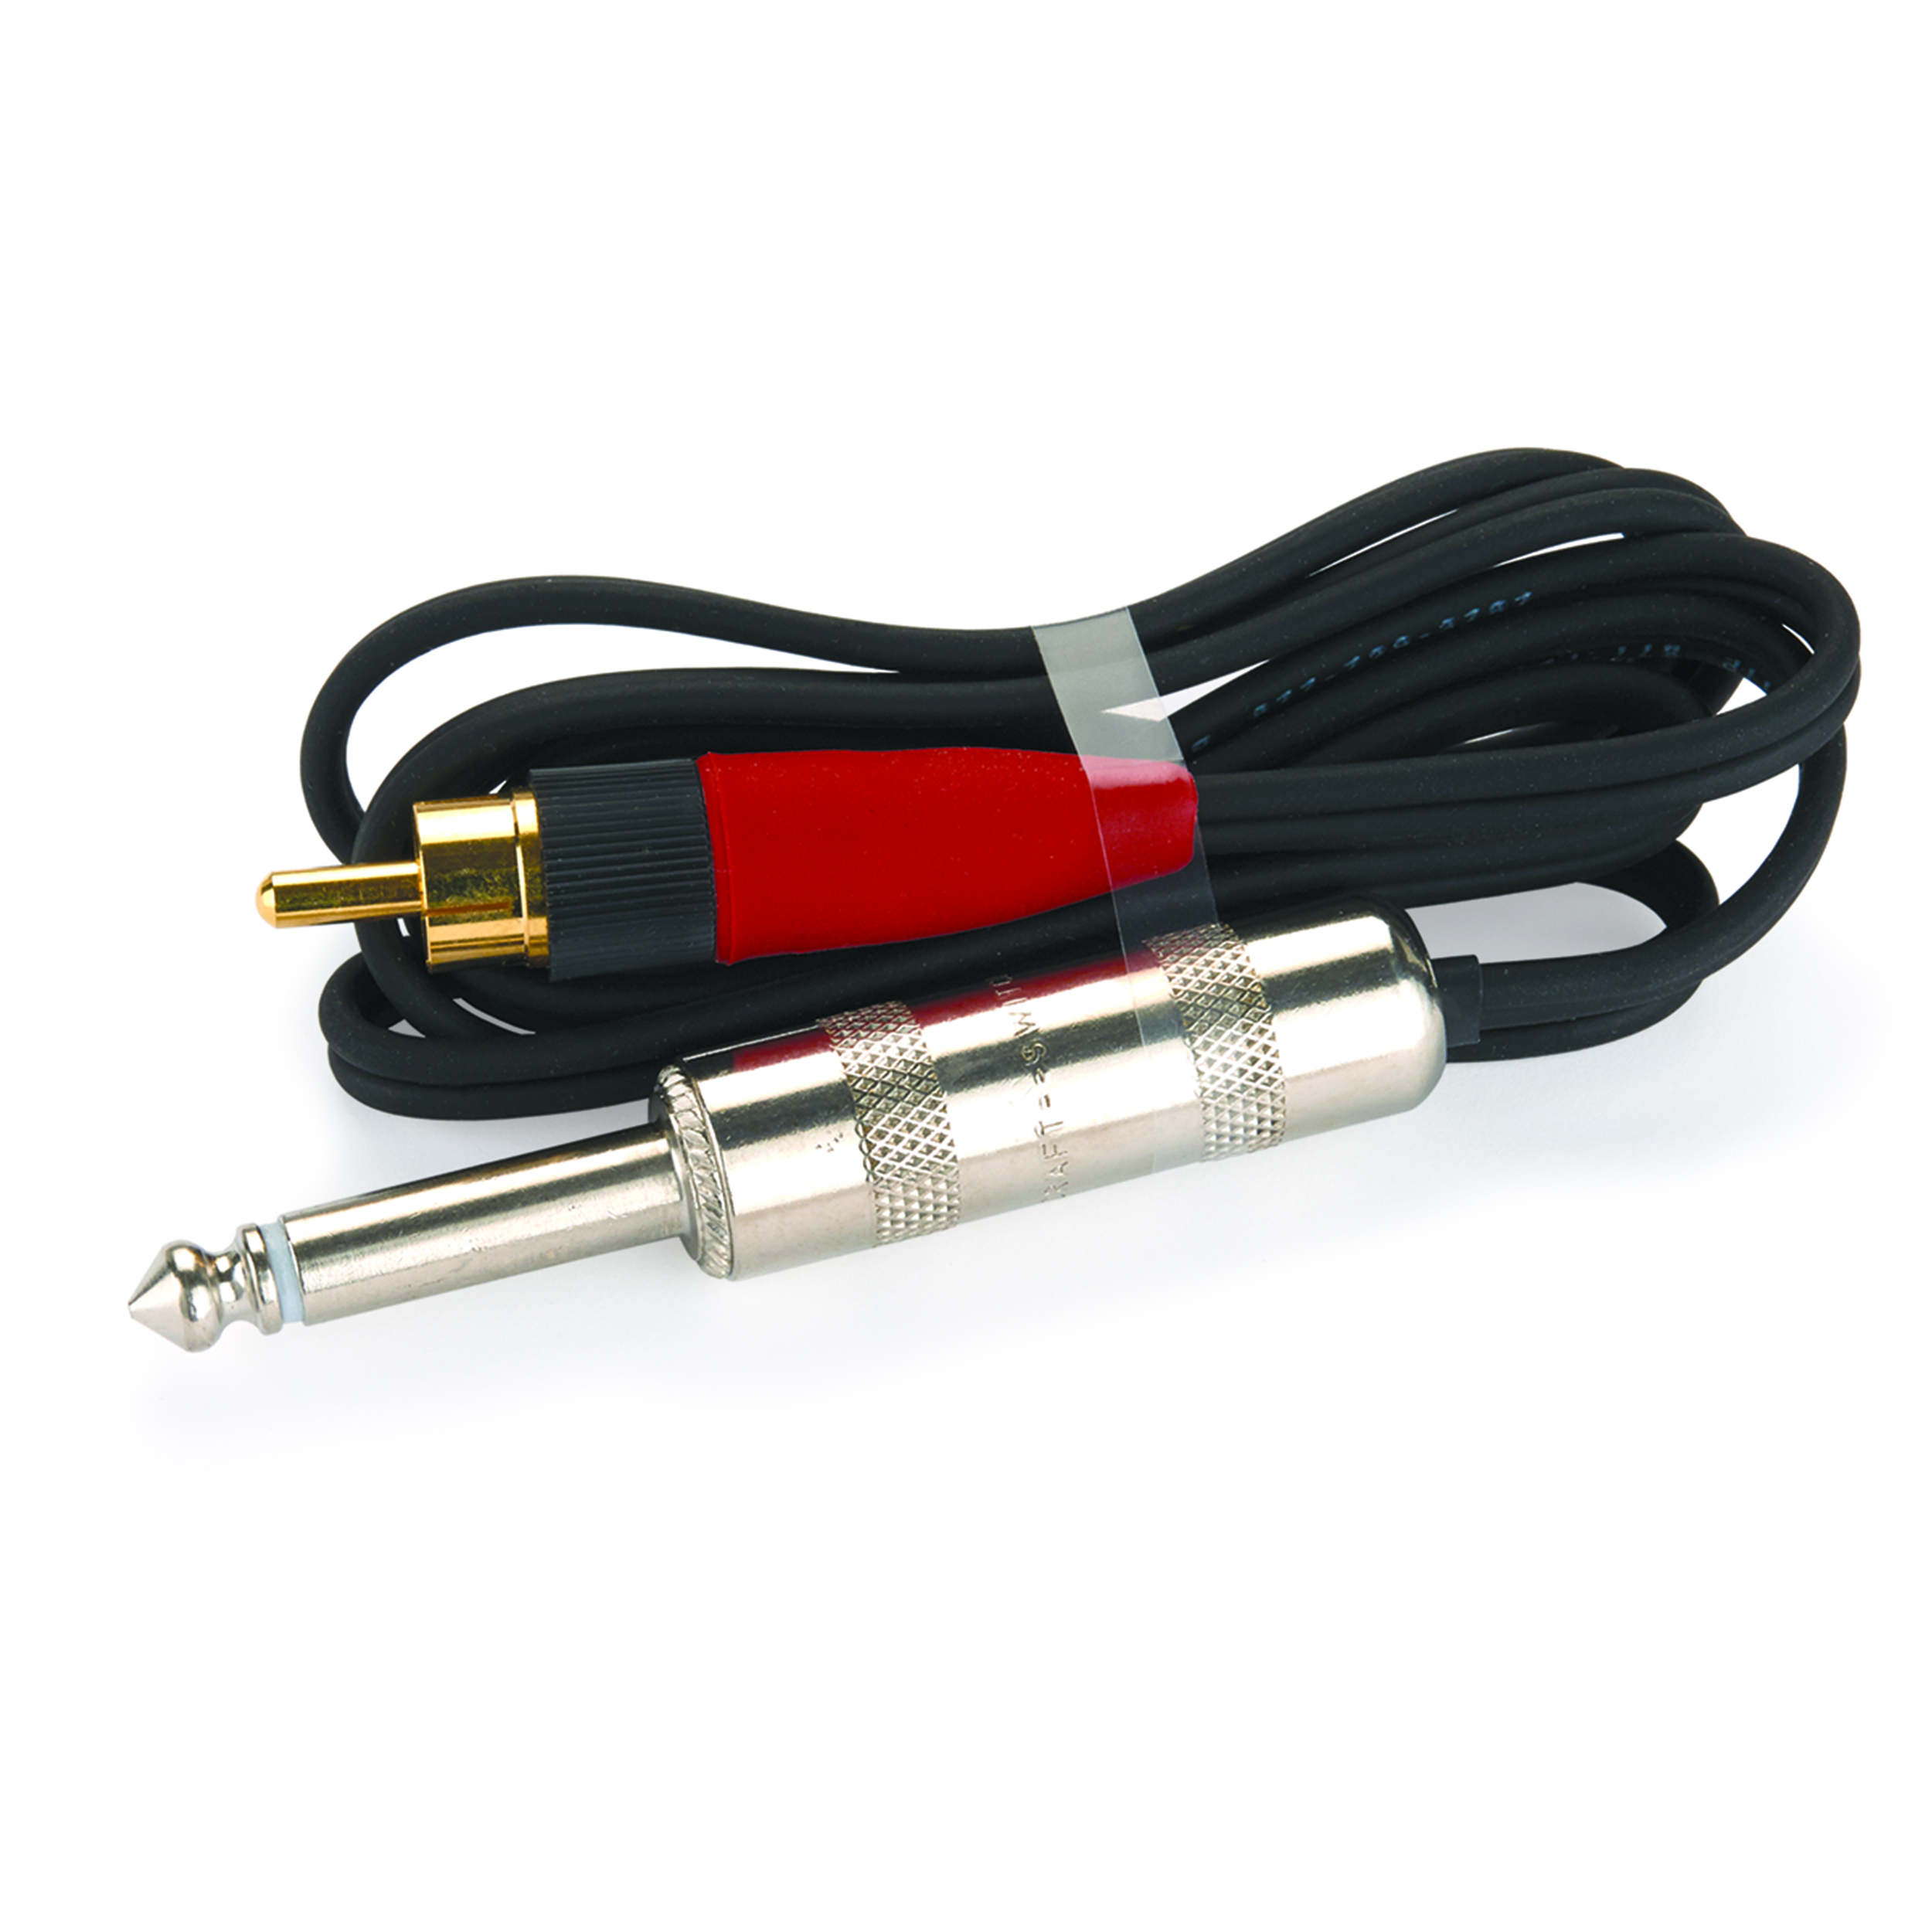 16-gauge Hd Adapter Cord, Pens On Detail Master Power Supply